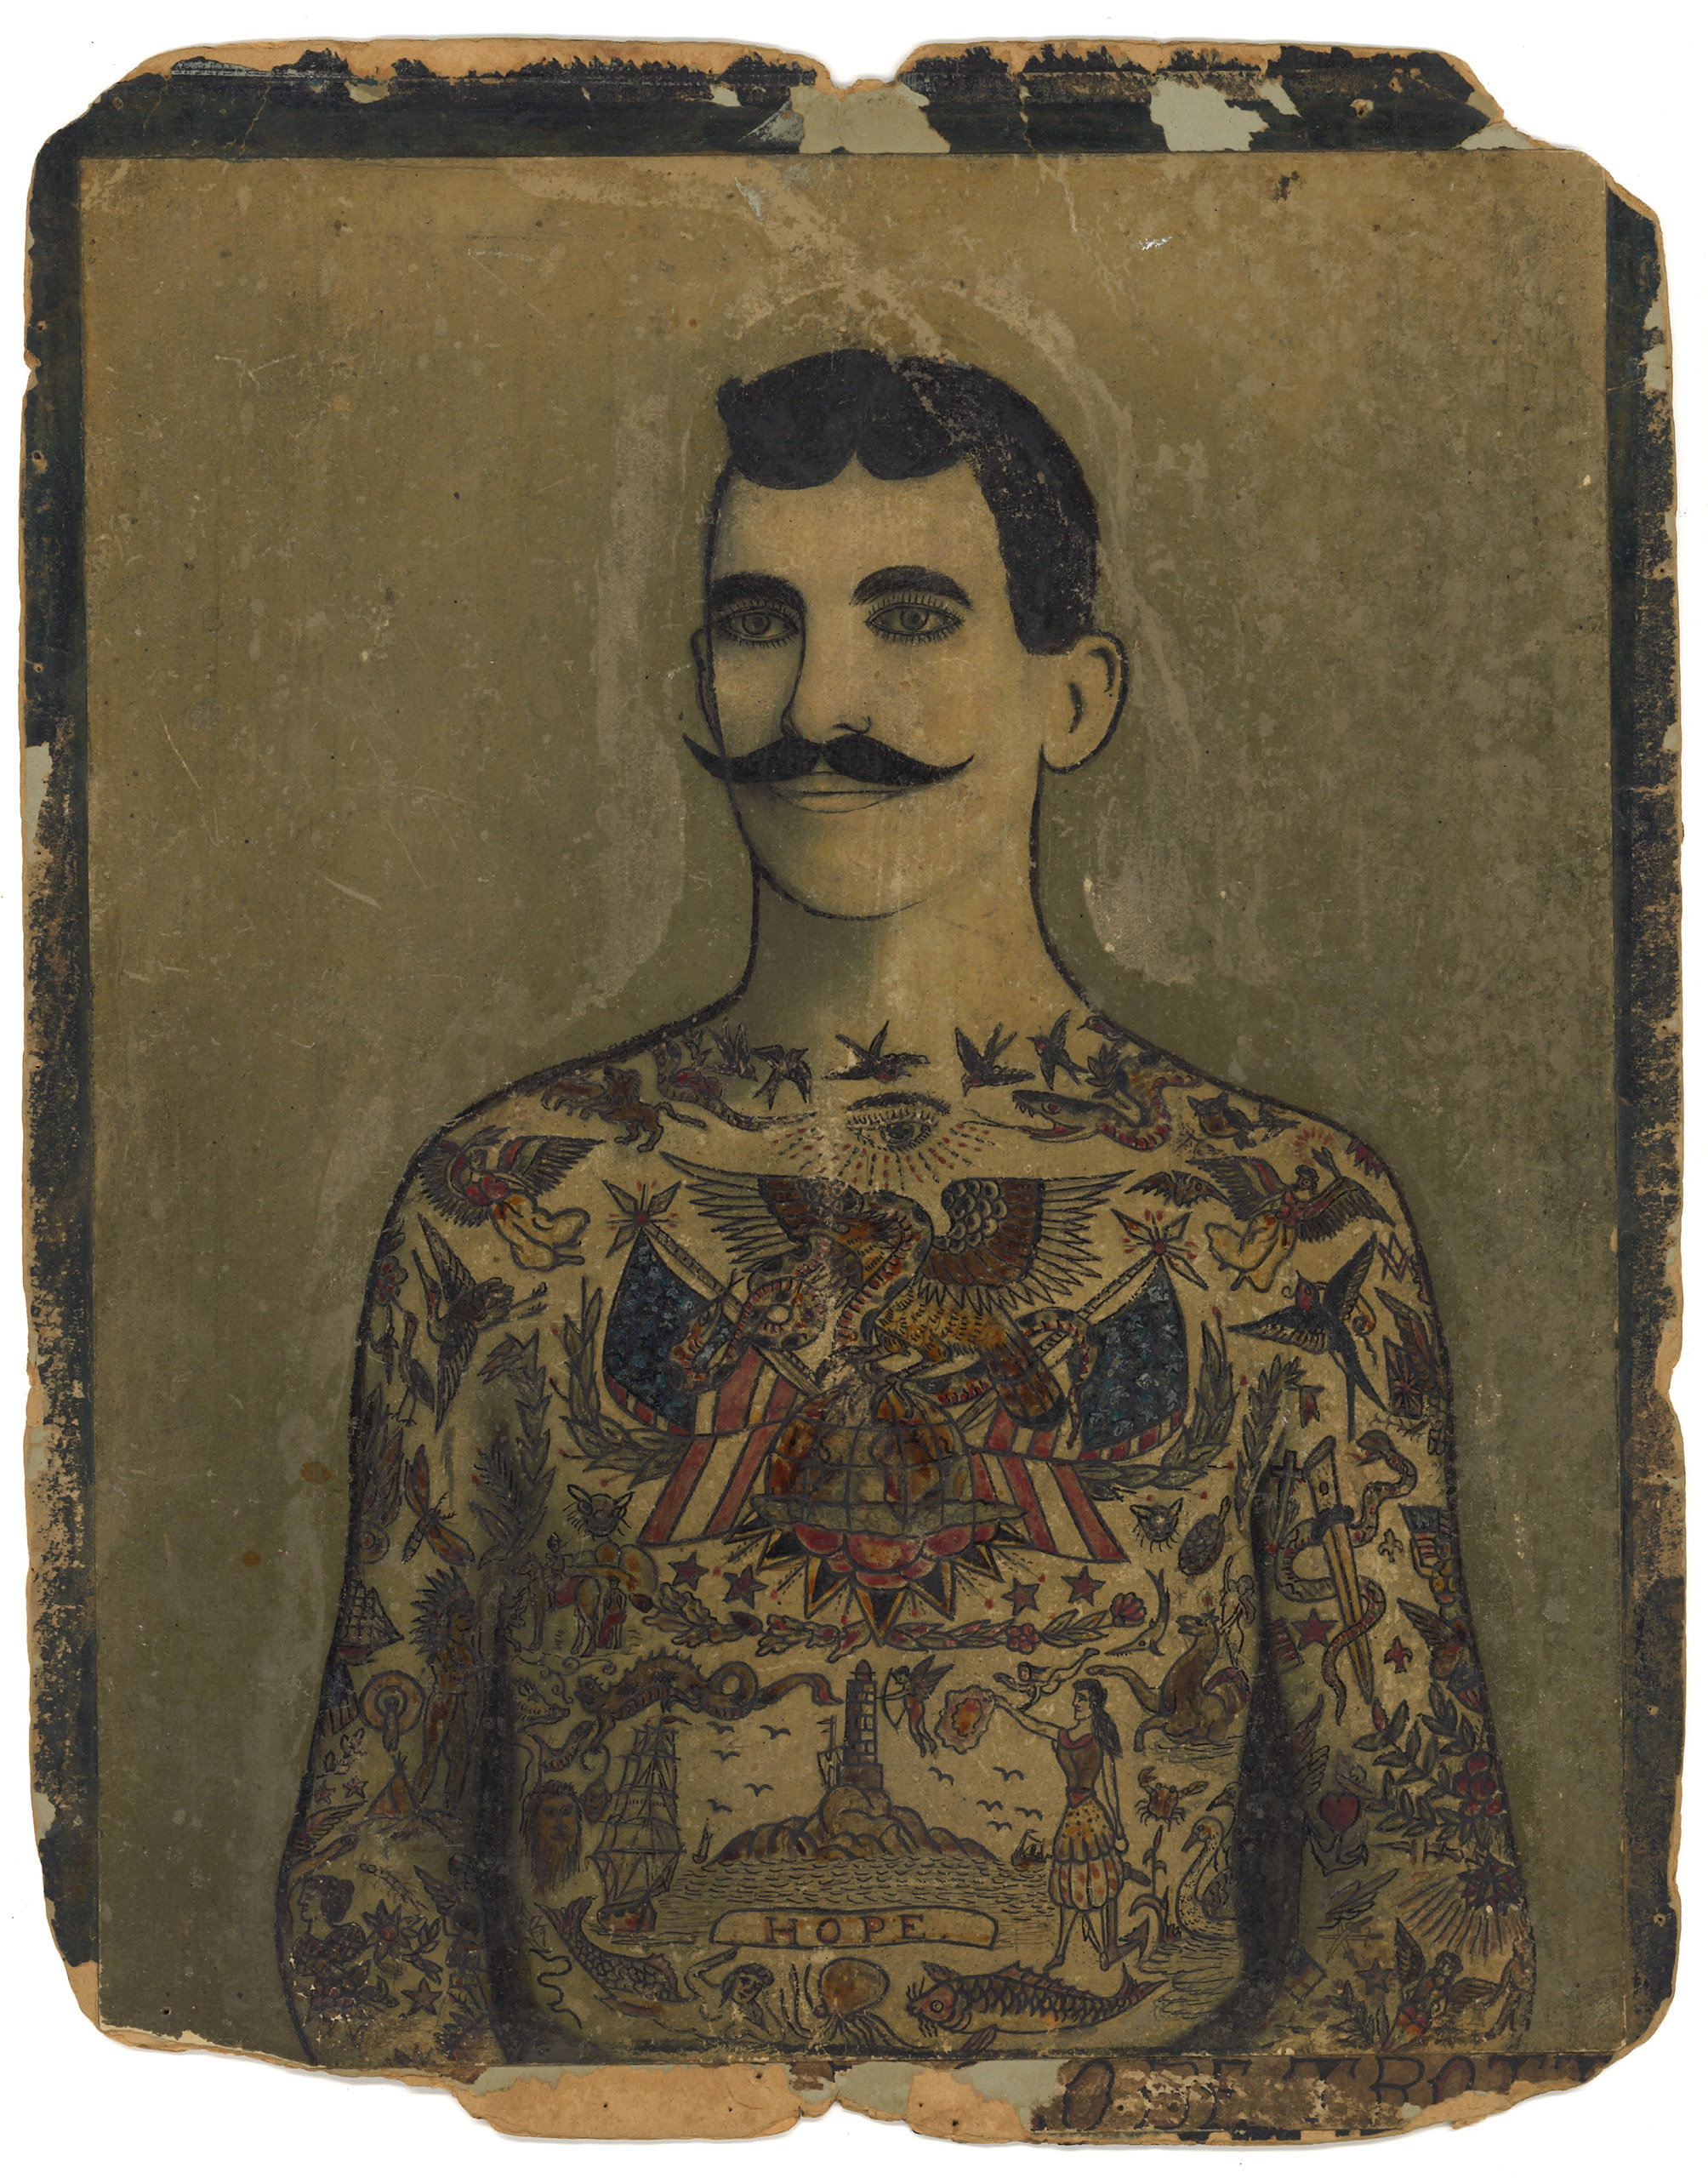 From the Seaport Museum Exhibition: Augustus “Gus” Wagner, 
                              Self-Portrait, Tattoo Flash, ca. 1910-1930.